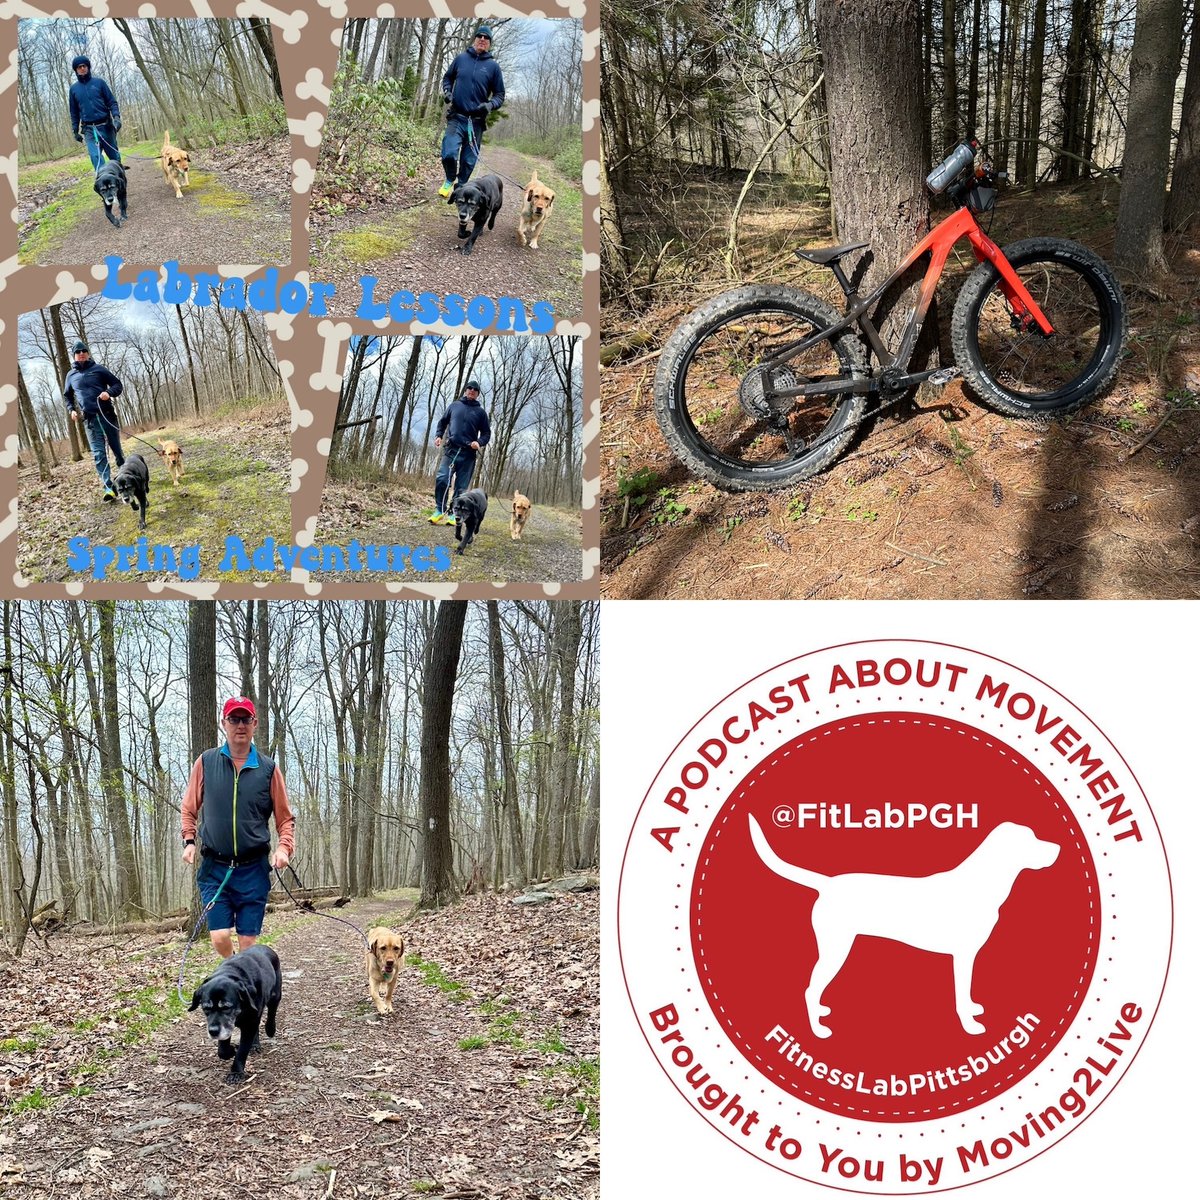 FitLabPGH promotes #movementisalifestyle with weekly movement tips & a Labrador Lesson. This week the Labs say Include Your Dogs in Your Spring Adventures.
Beckman
Our Movement Tips: Move With What You Have & Make Your Movement Mindful
tinyurl.com/flpghtips1624